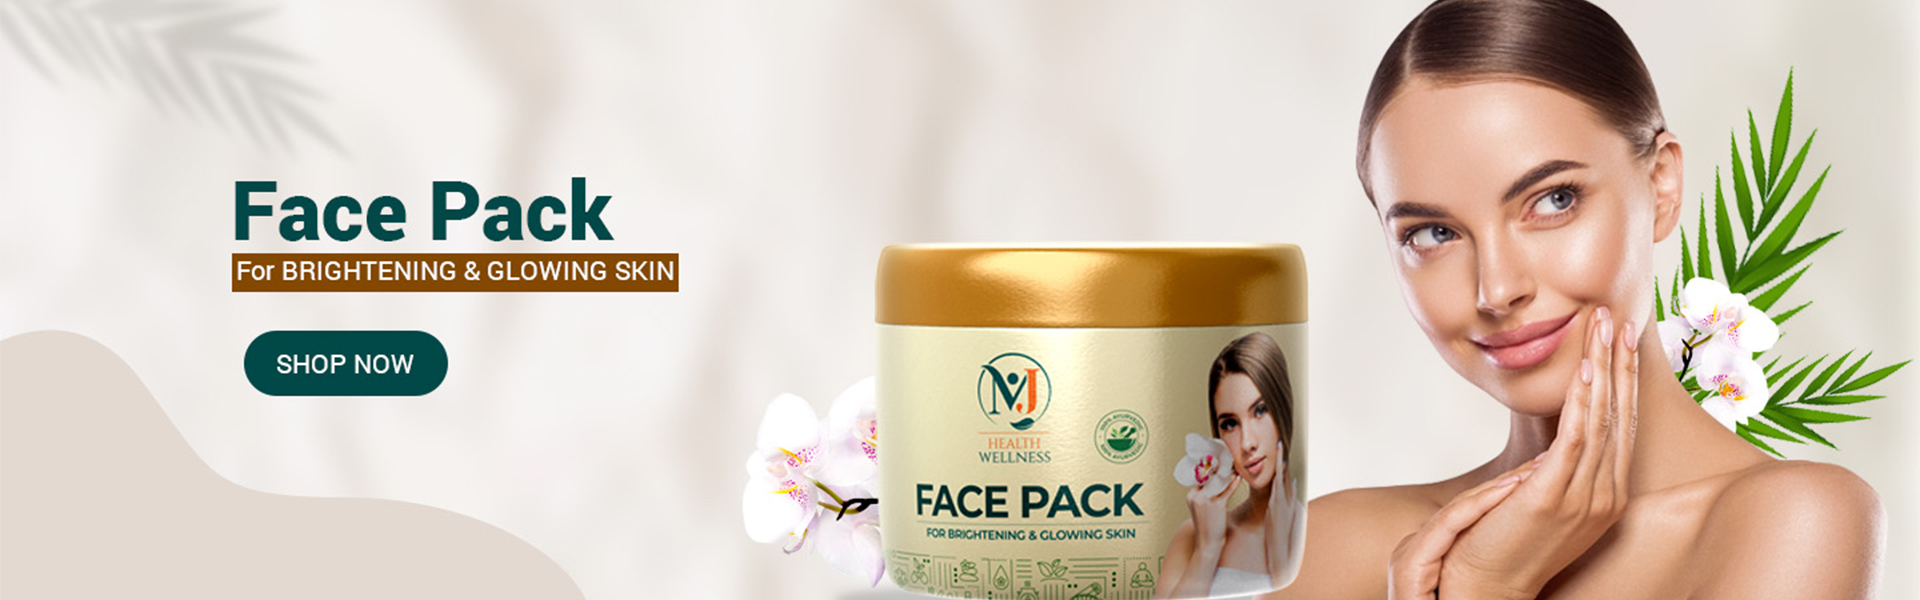 Organic ayurvedic Beauty Products Online for Natural Skincare| MJ Health Wellness